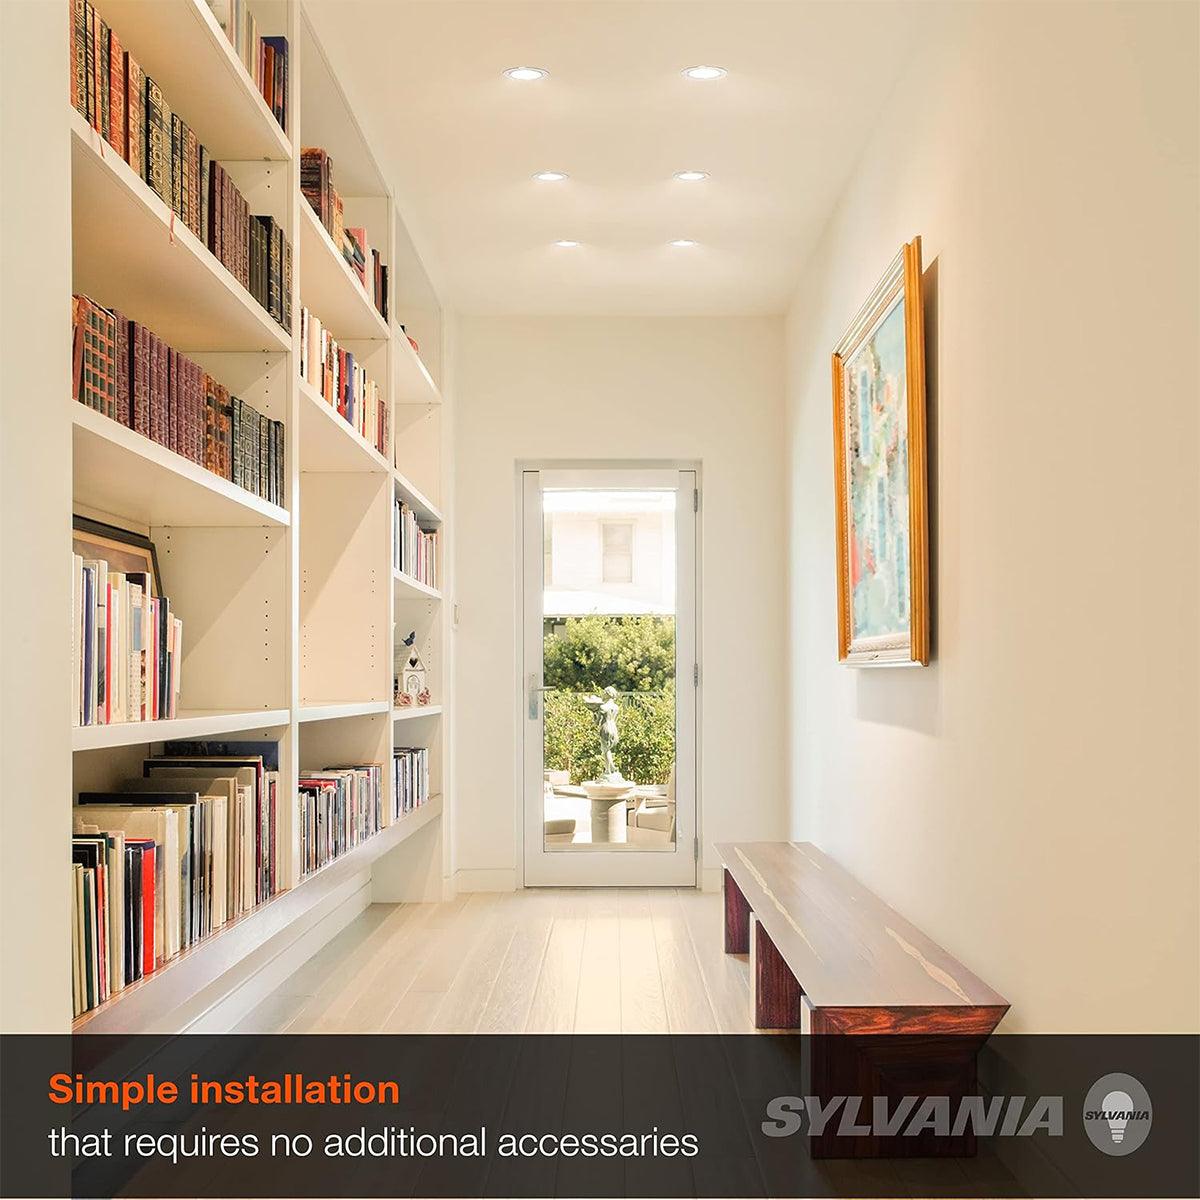 5/6'' Recessed LED Retrofit Can Light, 65W Equal, 625 Lumens, 3000K, Smooth White Trim (Pack of 4)